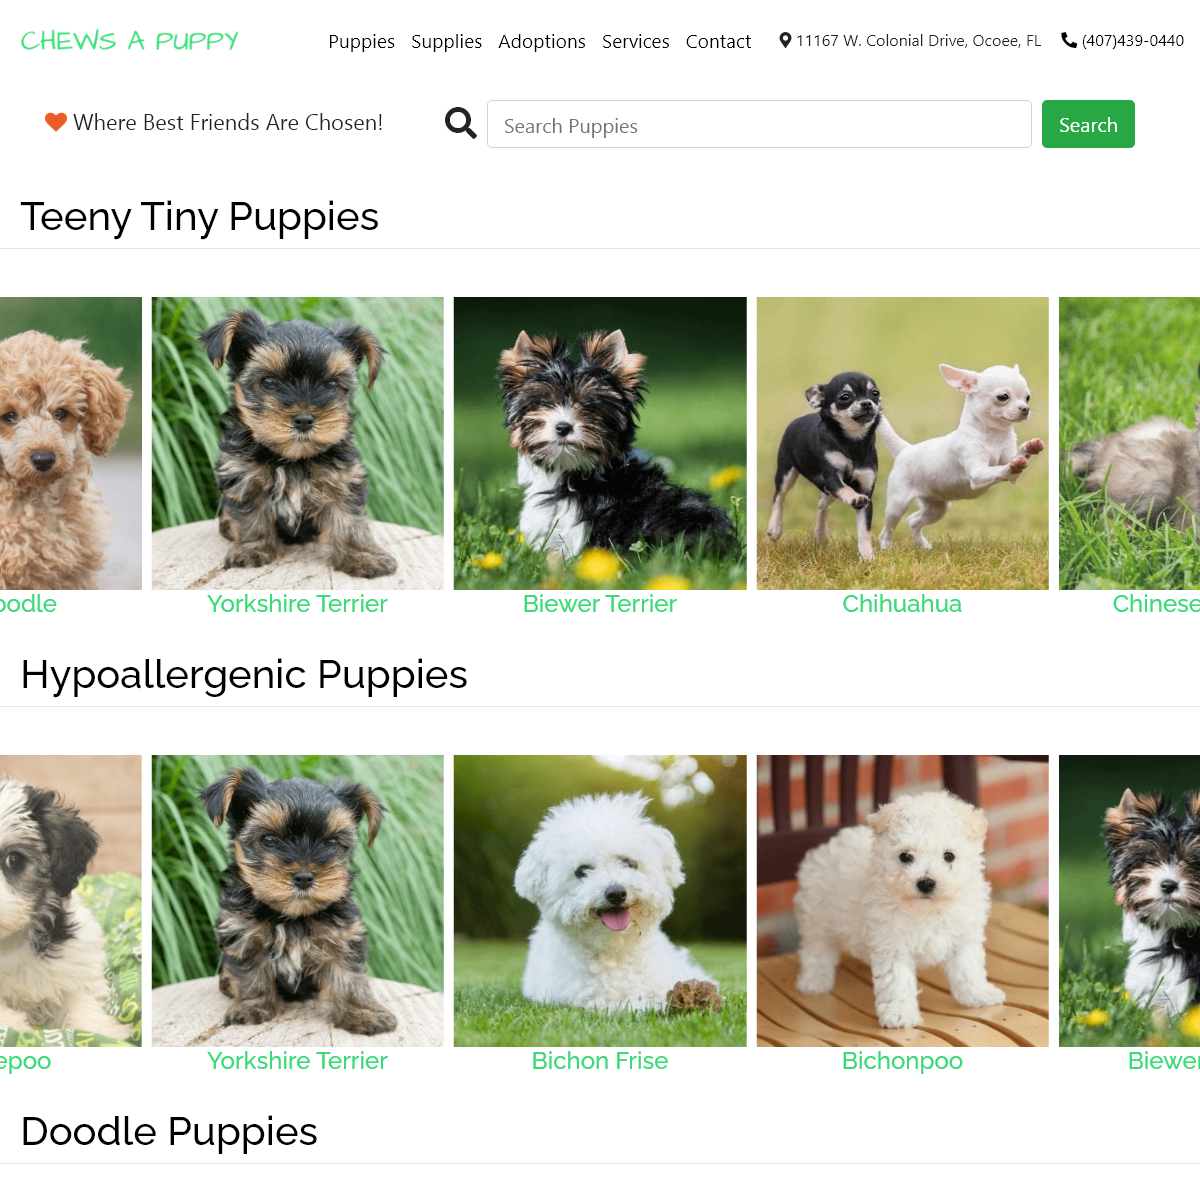 A complete backup of chewsapuppy.com